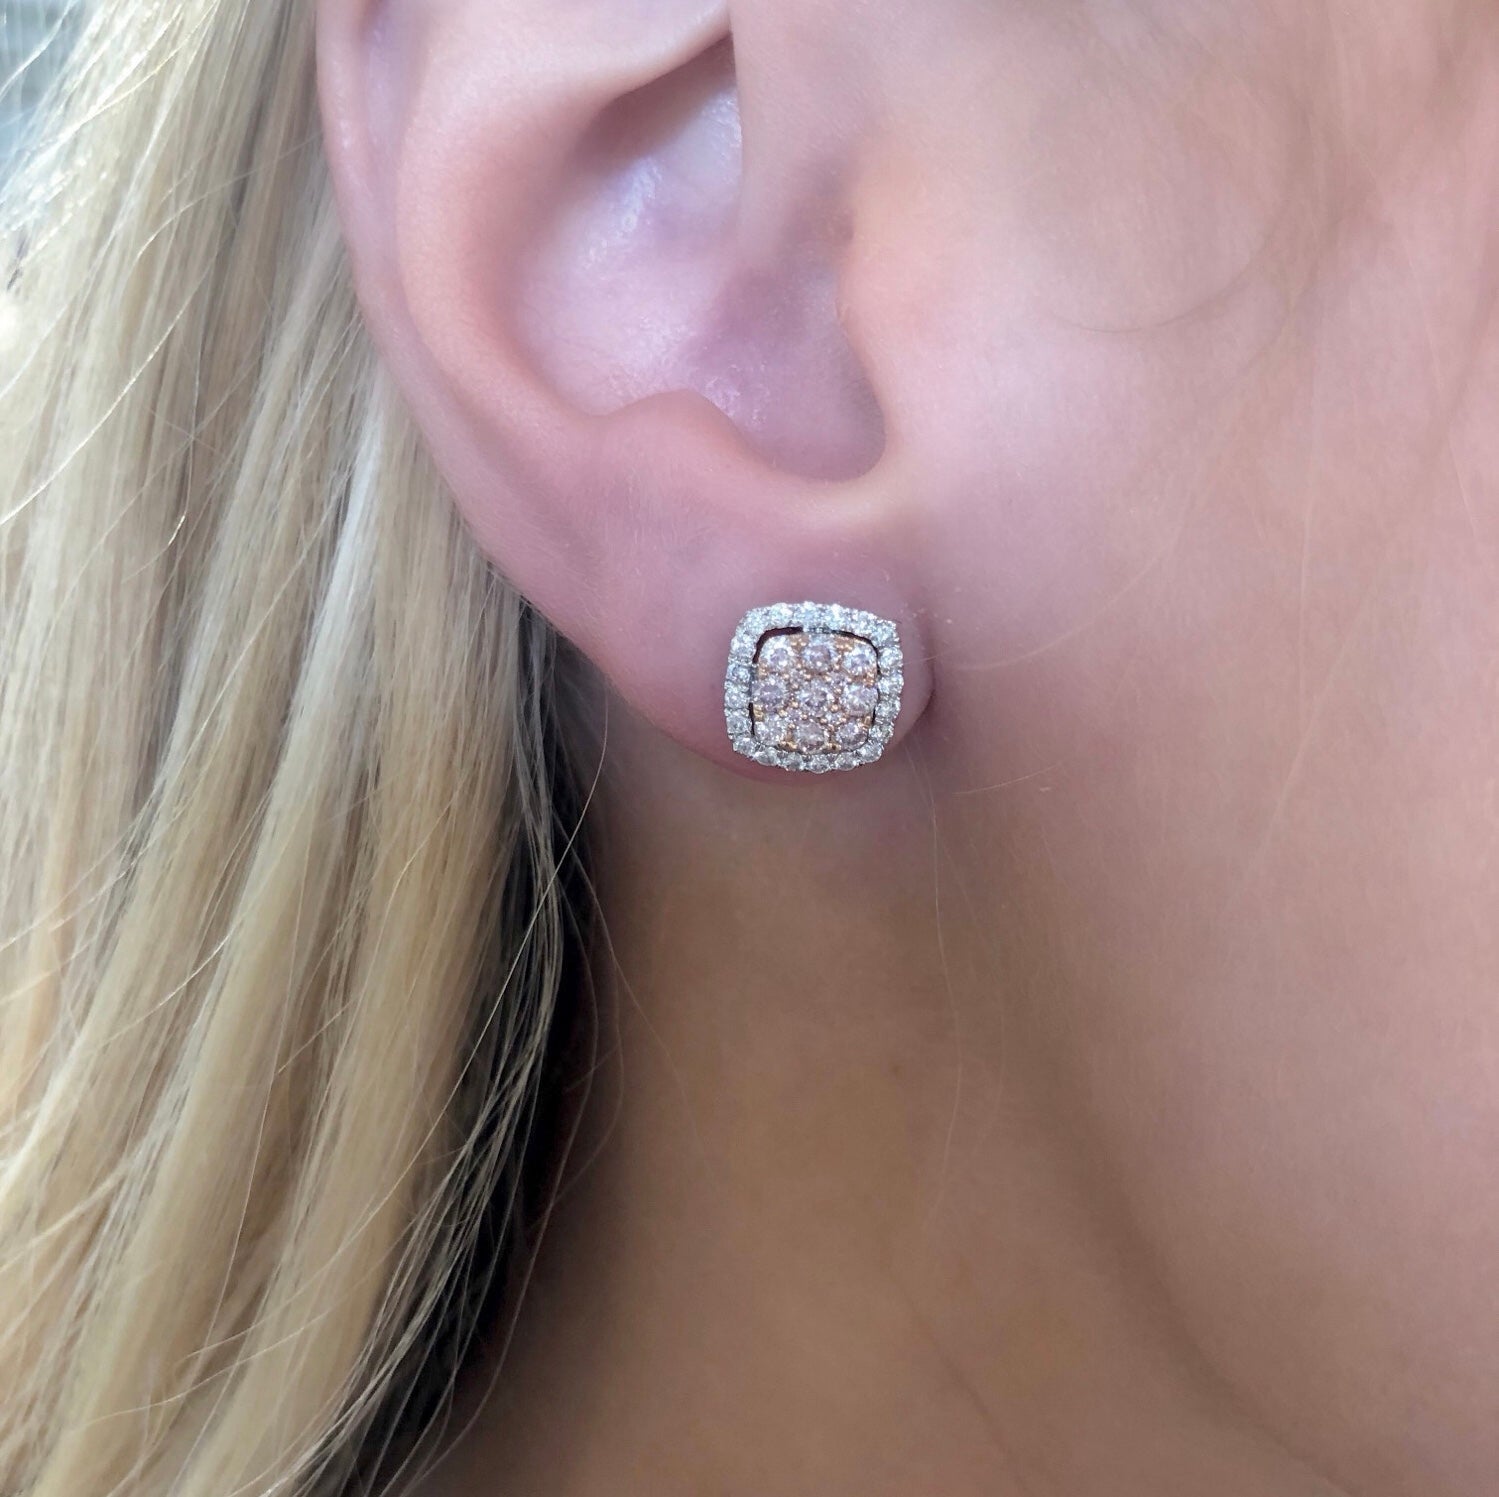 Pink Diamond Square Stud Earrings with White Diamonds - Talisman Collection Fine Jewelers